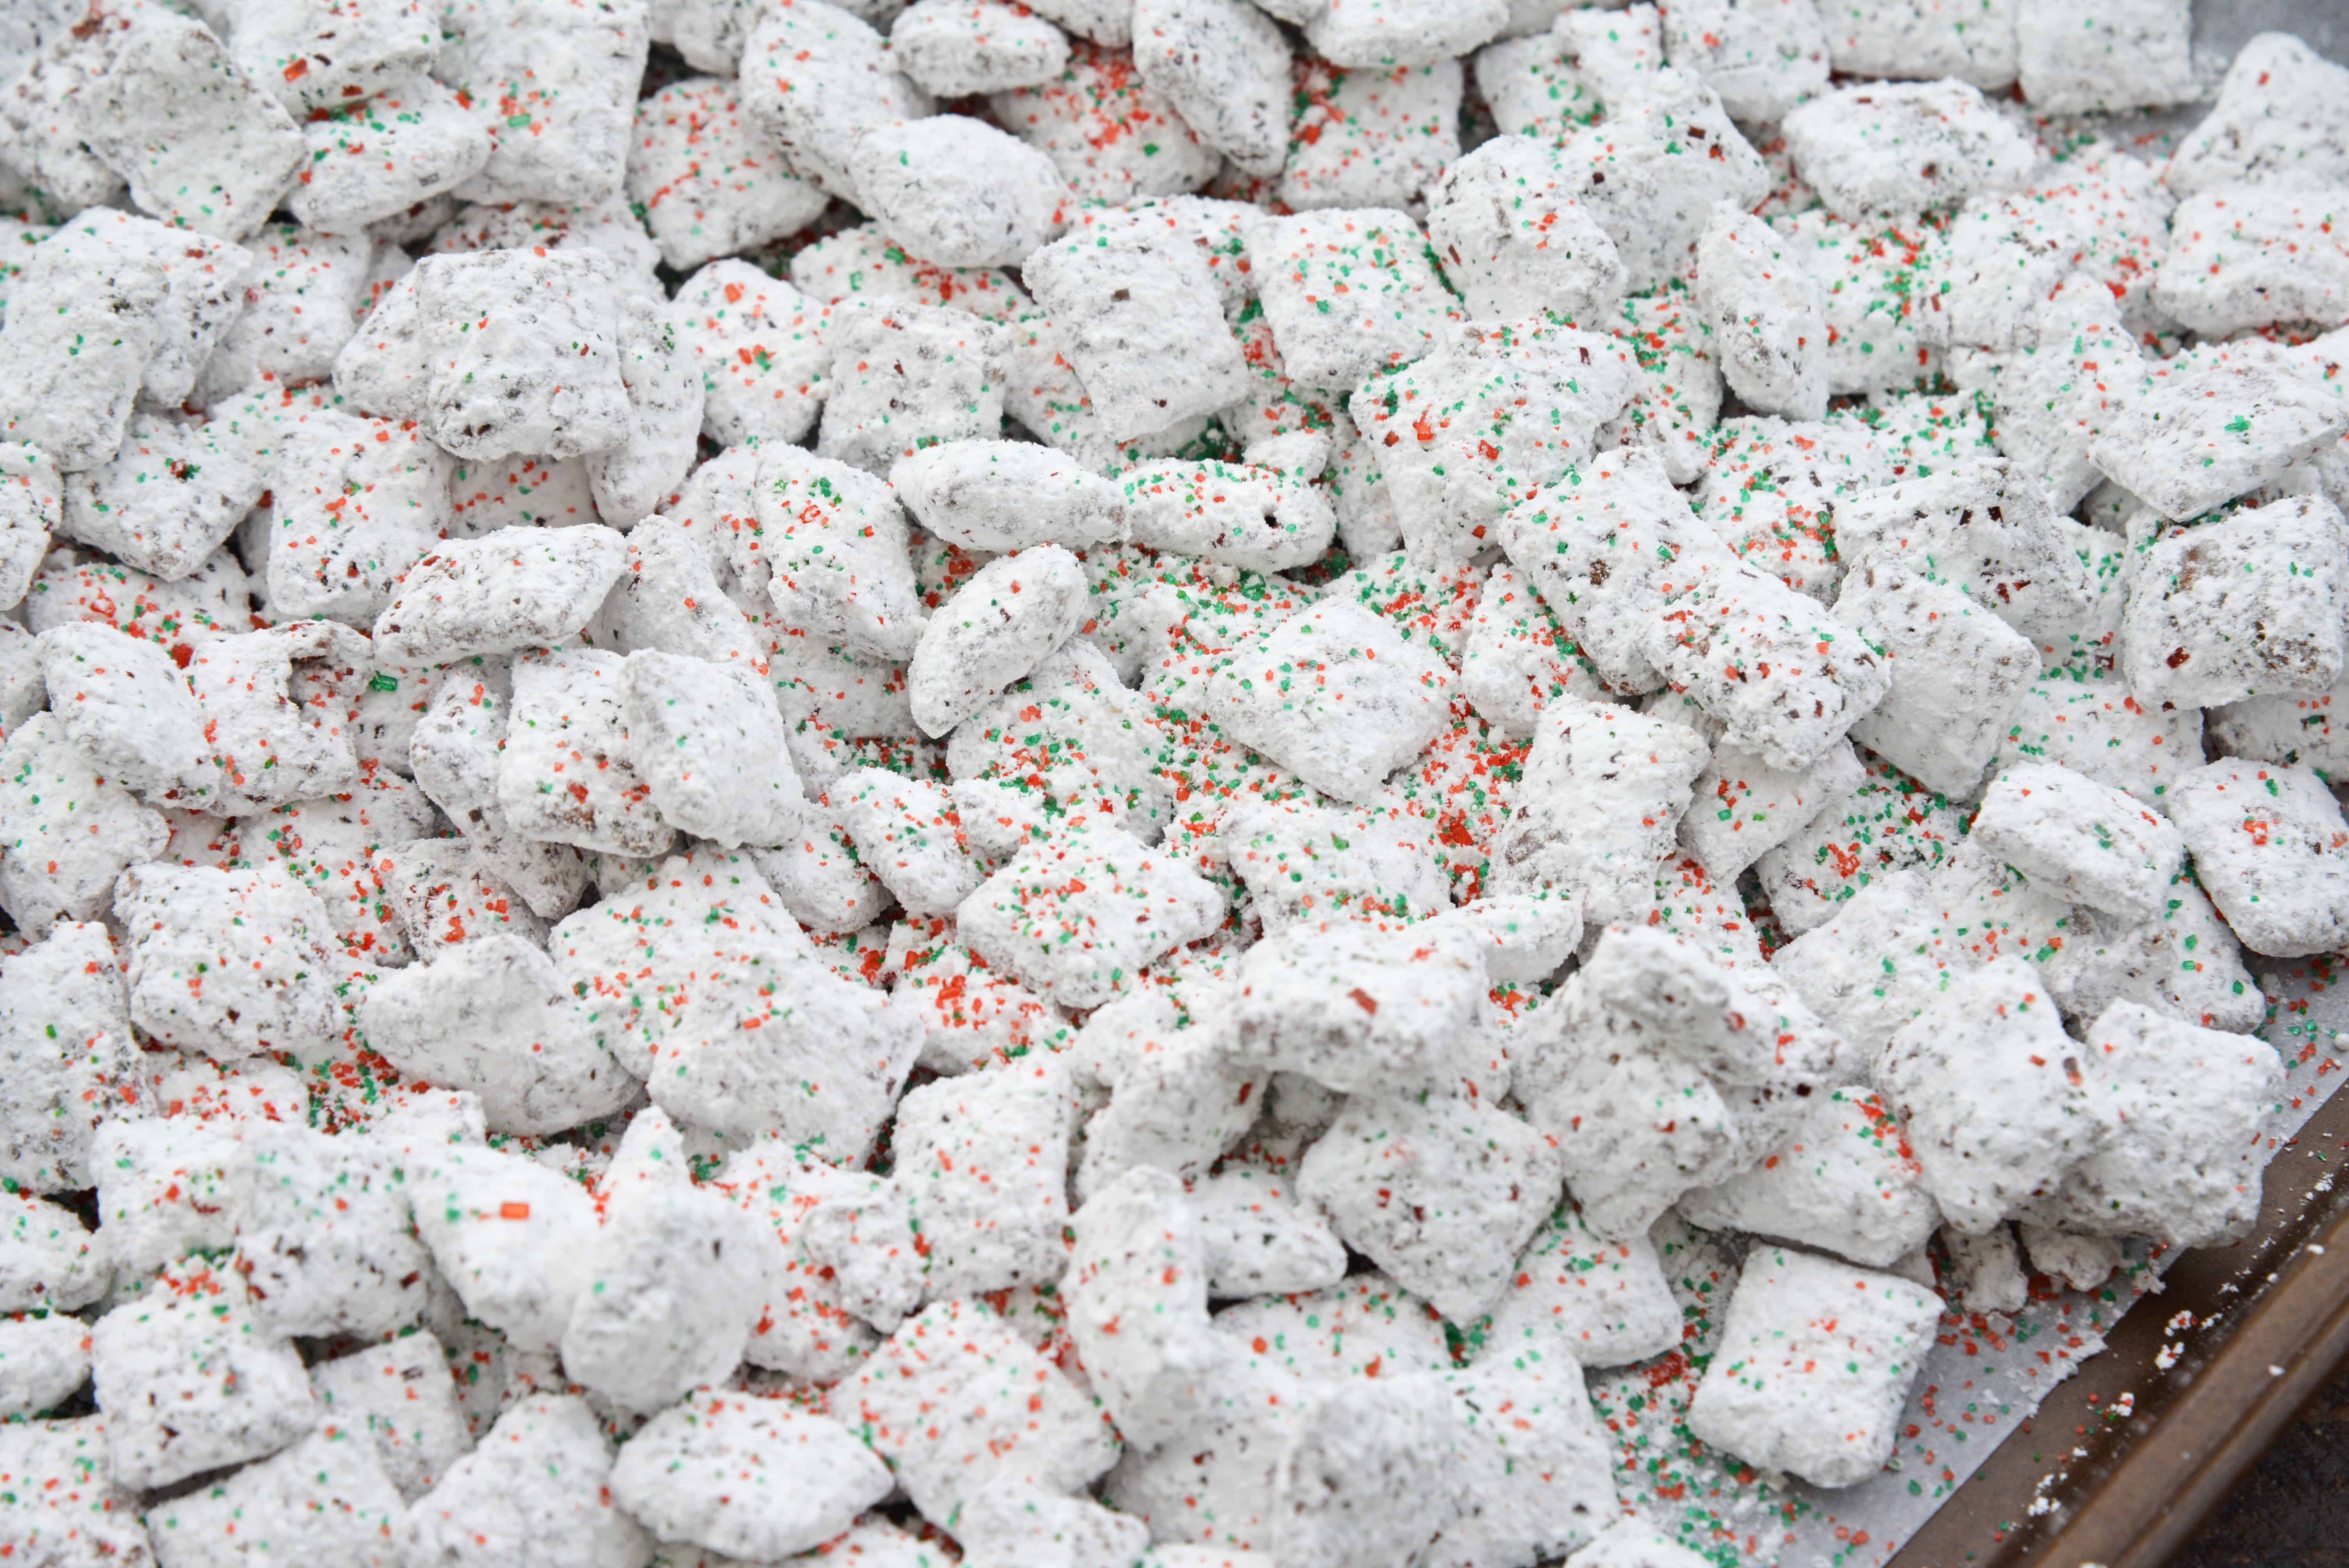 Christmas Puppy Chow transforms a traditional muddy buddy recipe into a festive Reindeer Chow mix! The perfect no-bake dessert for any party or event. #puppychow #reindeerchow #muddybuddy www.savoryexperiments.com